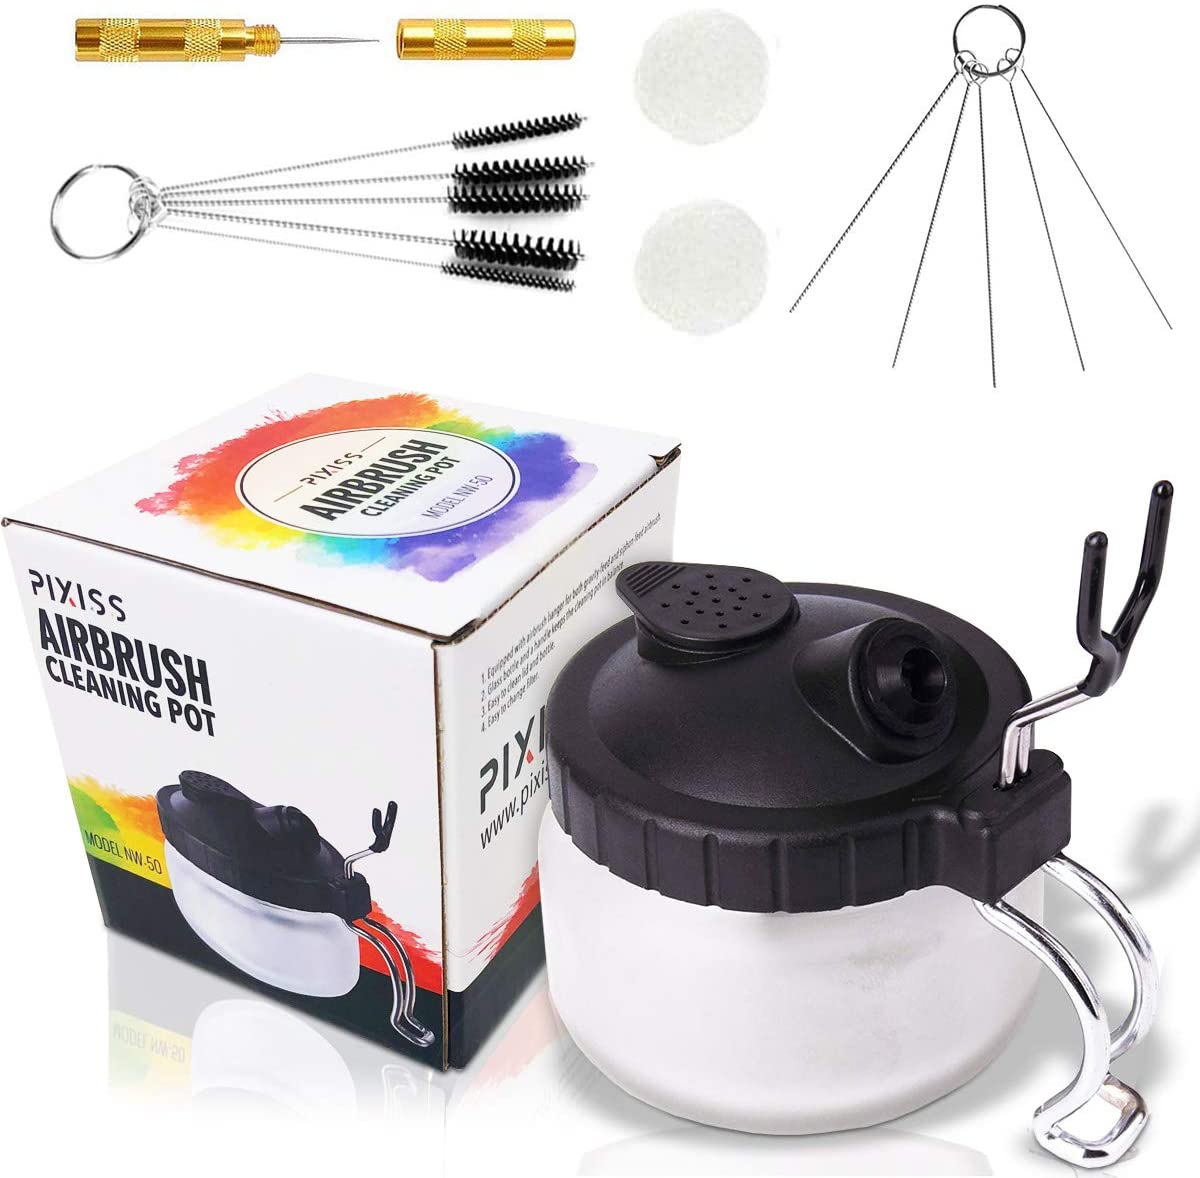 Master Airbrush 3-in-1 Cleaning Pot with Holder; Cleans and Holds Airbrush,  Color Palette Lid